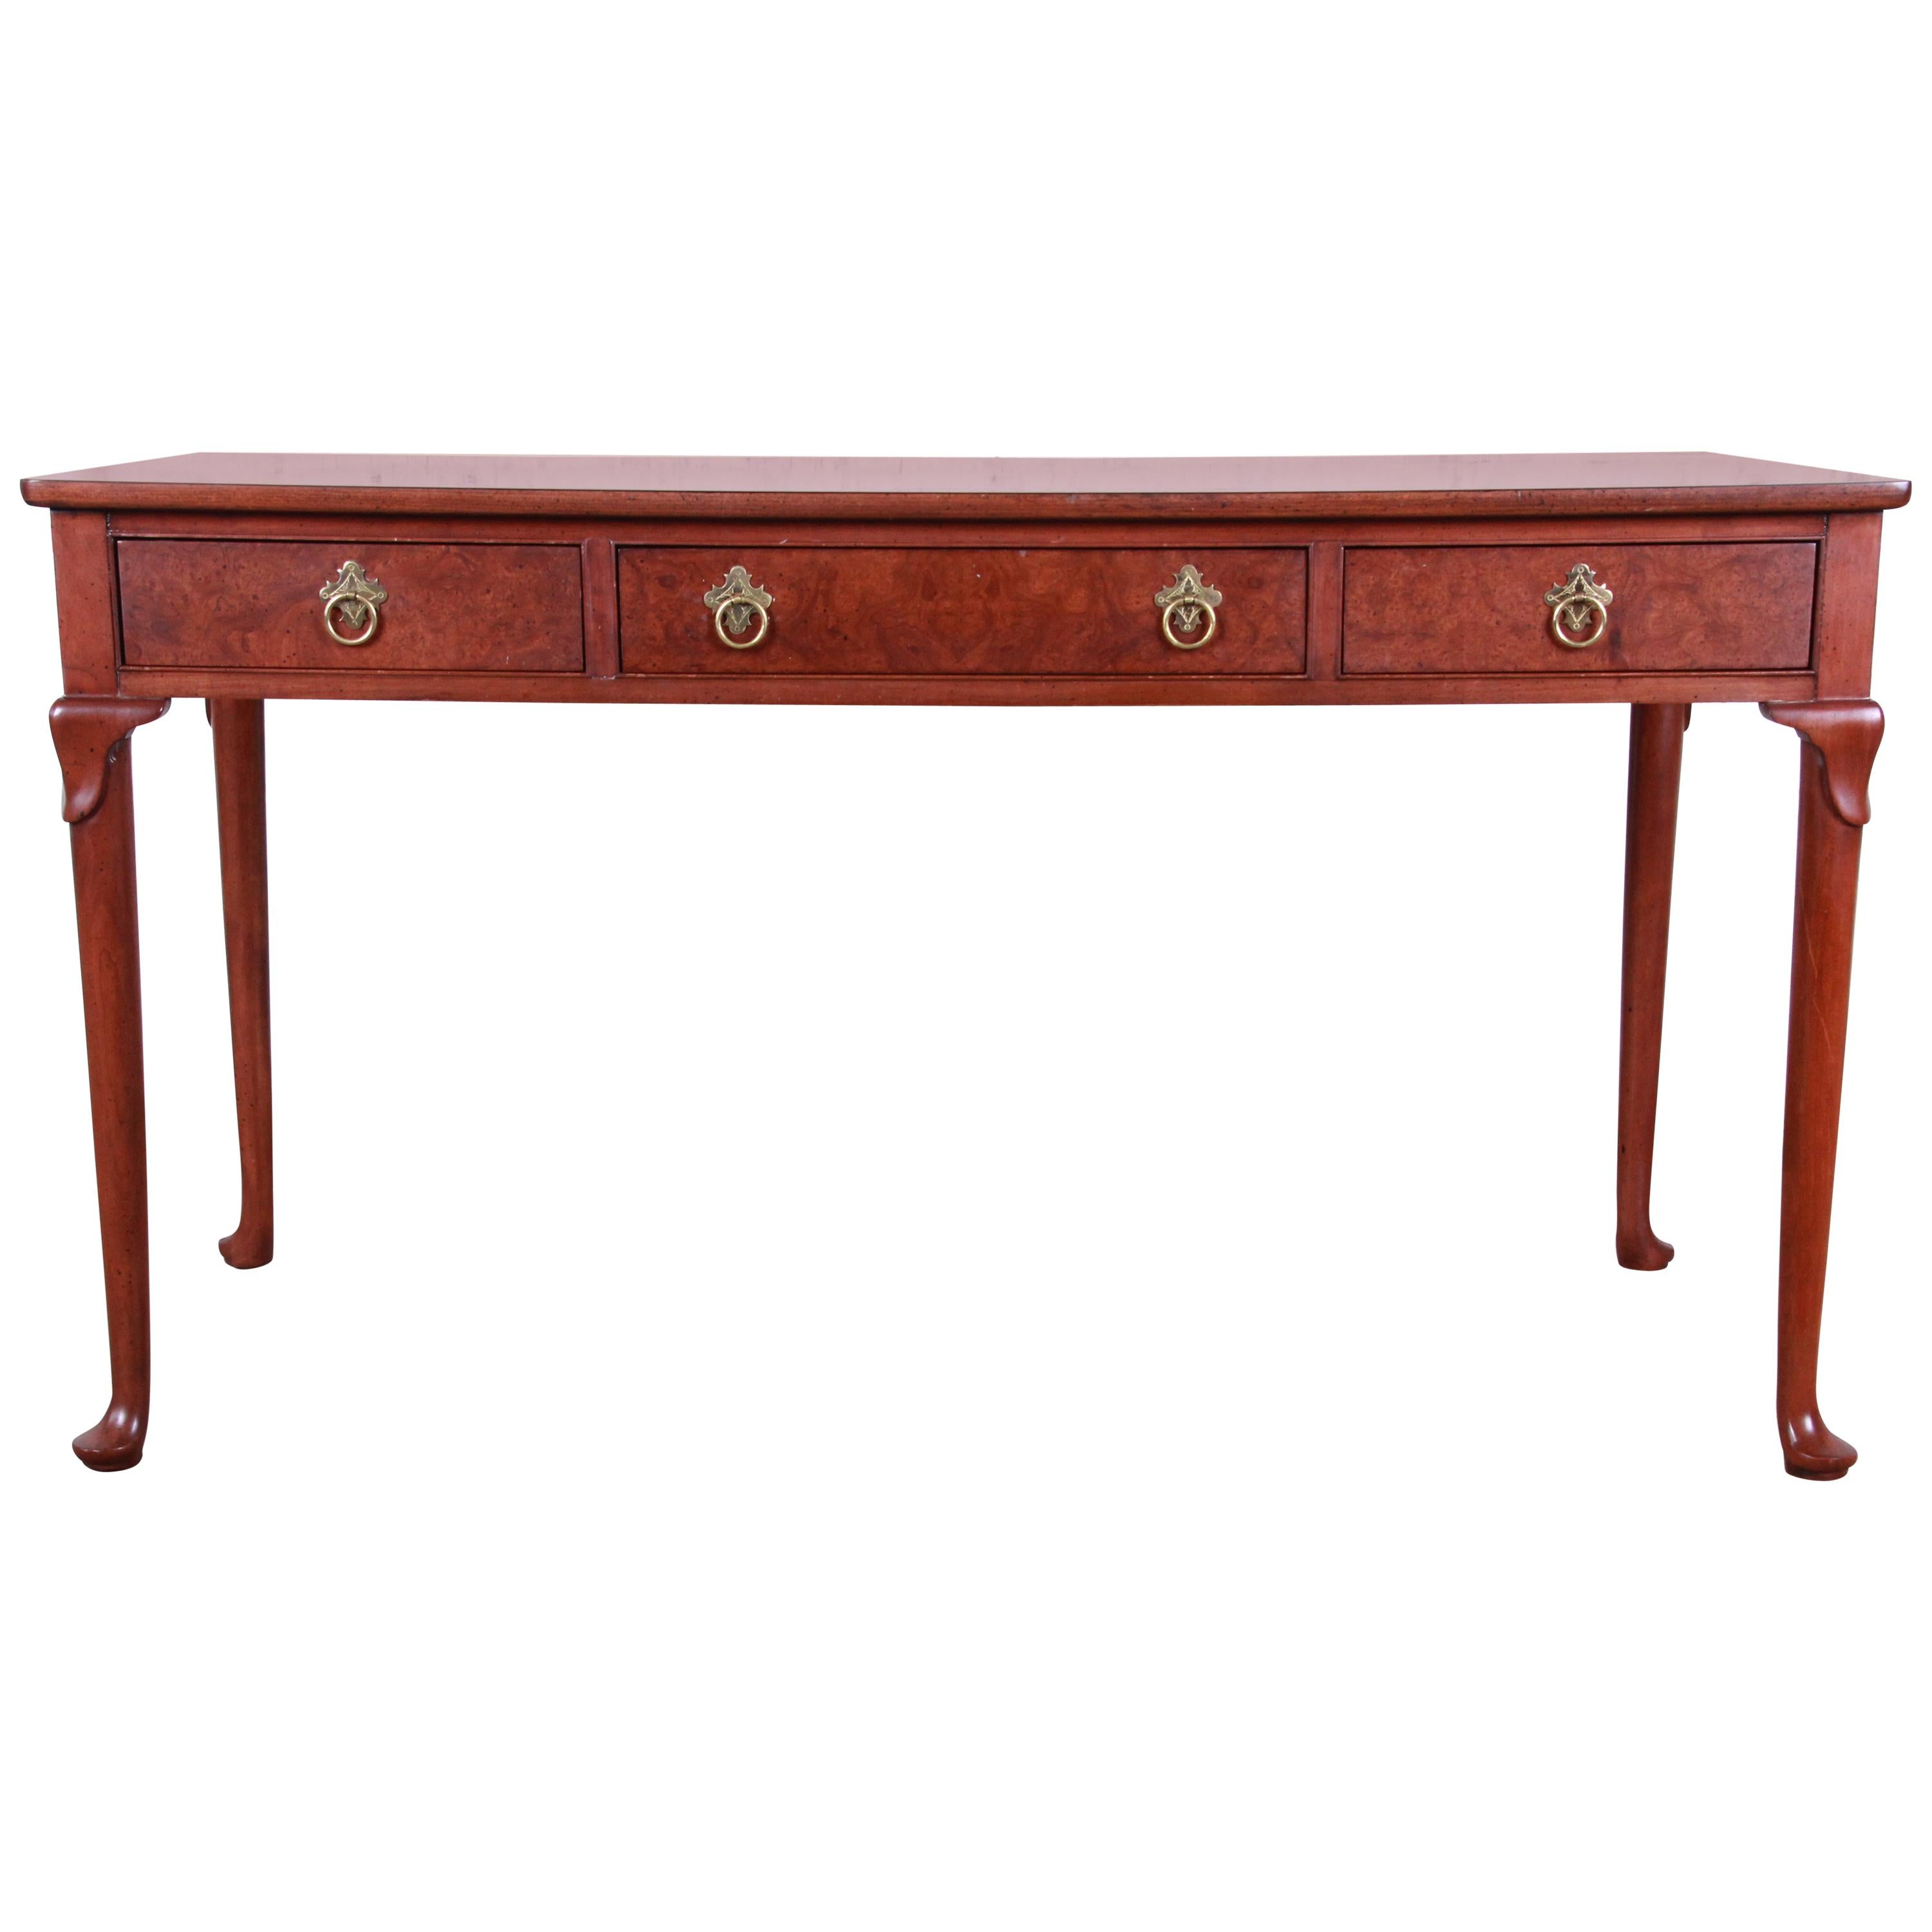 Baker Furniture Cherry And Burl Wood Queen Anne Writing Desk At